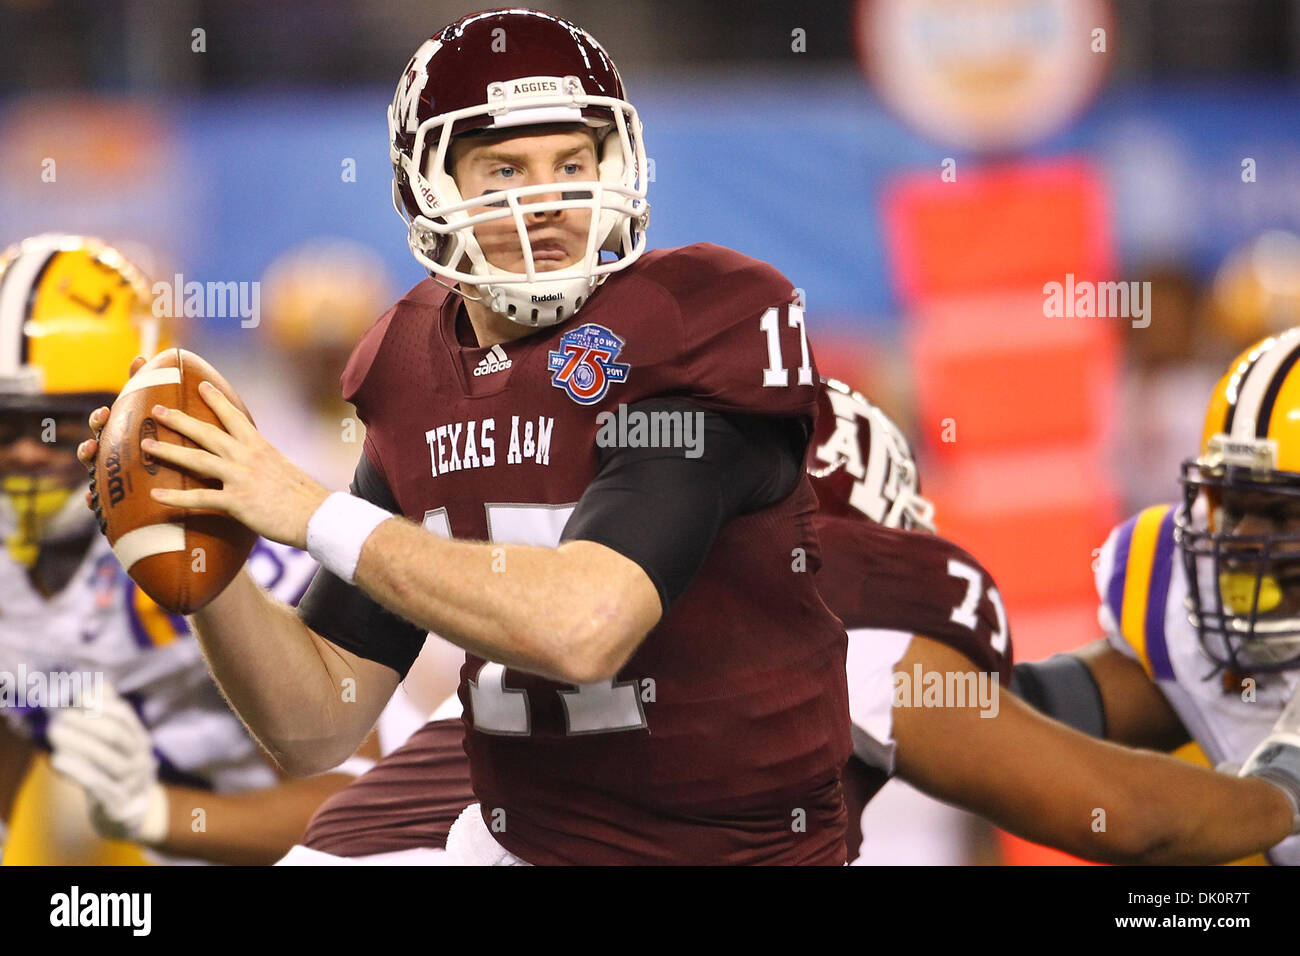 Jan. 7, 2011 - Arlington, Texas, U.S. - Texas A&M Aggies QB/WR RYAN TANNEHILL (#17) looks to the sideline for a pass. The LSU Tigers defeated the Texas A&M Aggies 41-24 in the 2010 AT&T Cotton Bowl at Dallas Cowboys Stadium. (Credit Image: © Anthony Vasser/Southcreek Global/ZUMAPRESS.com) Stock Photo